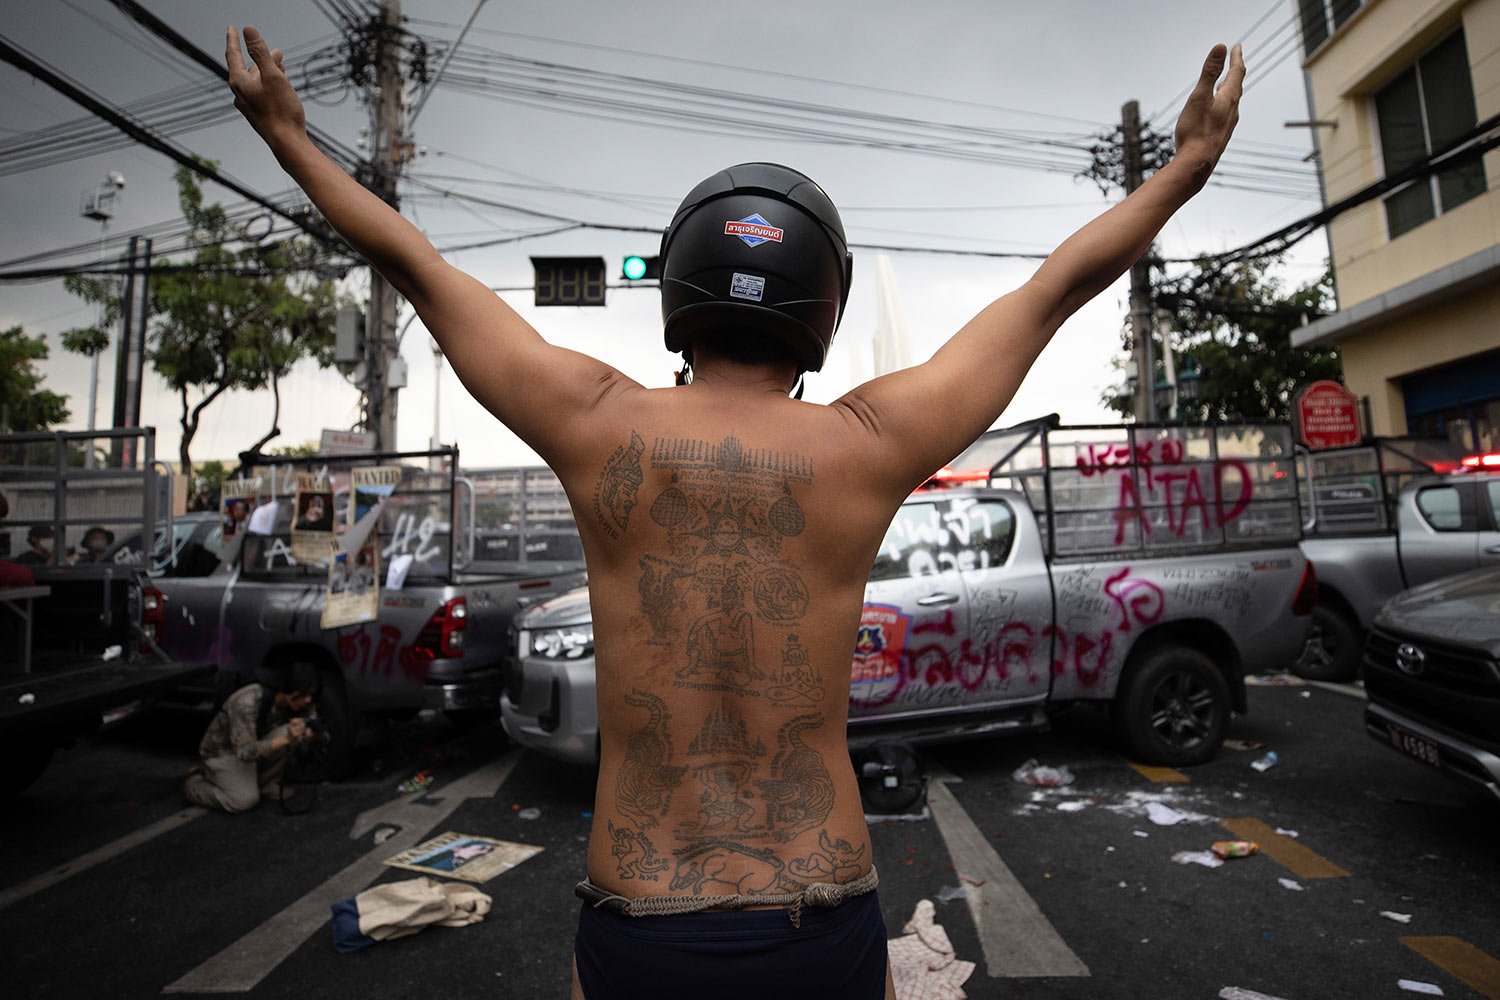  A protester raises his arms behind vandalized police vehicles during a confrontation with police as they try to march to the Asia-Pacific Economic Cooperation APEC summit venue, Friday, Nov. 18, 2022, in Bangkok, Thailand. (AP Photo/Wason Wanichakor